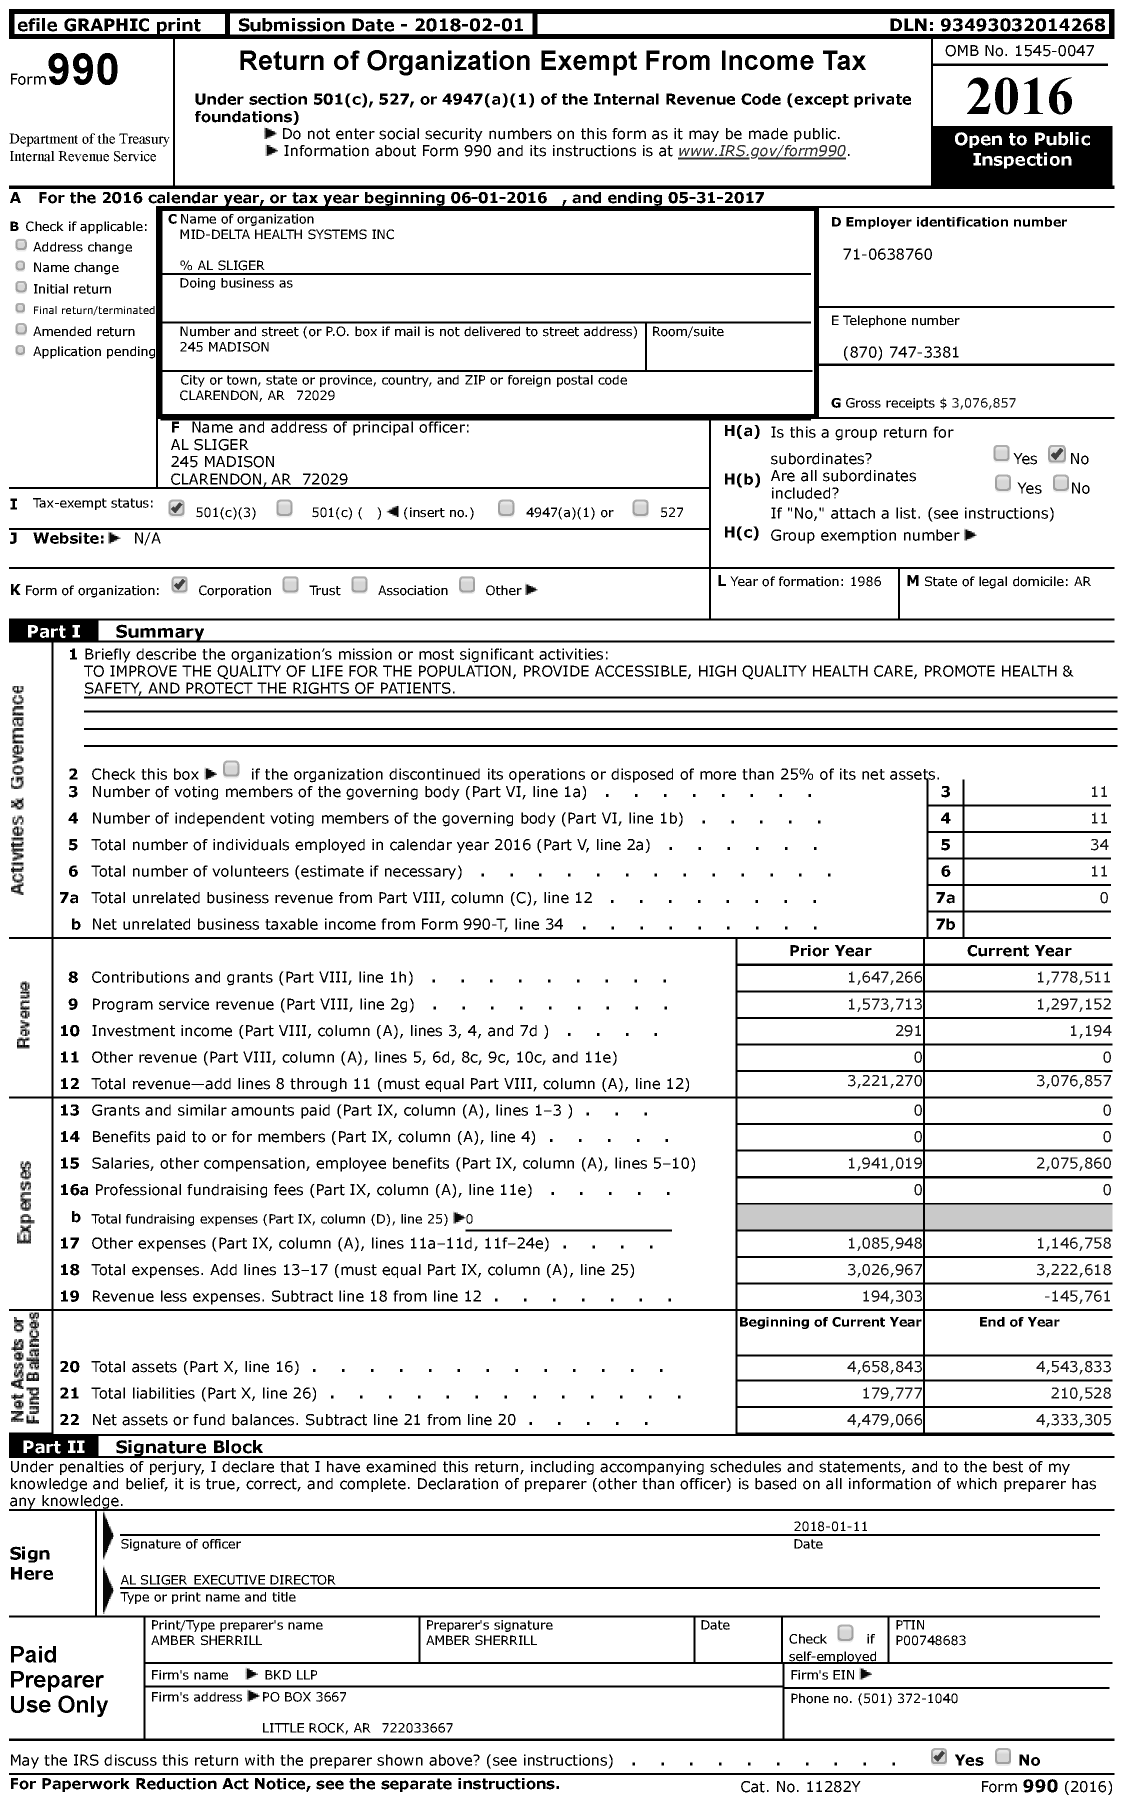 Image of first page of 2016 Form 990 for Mid-Delta Health Systems